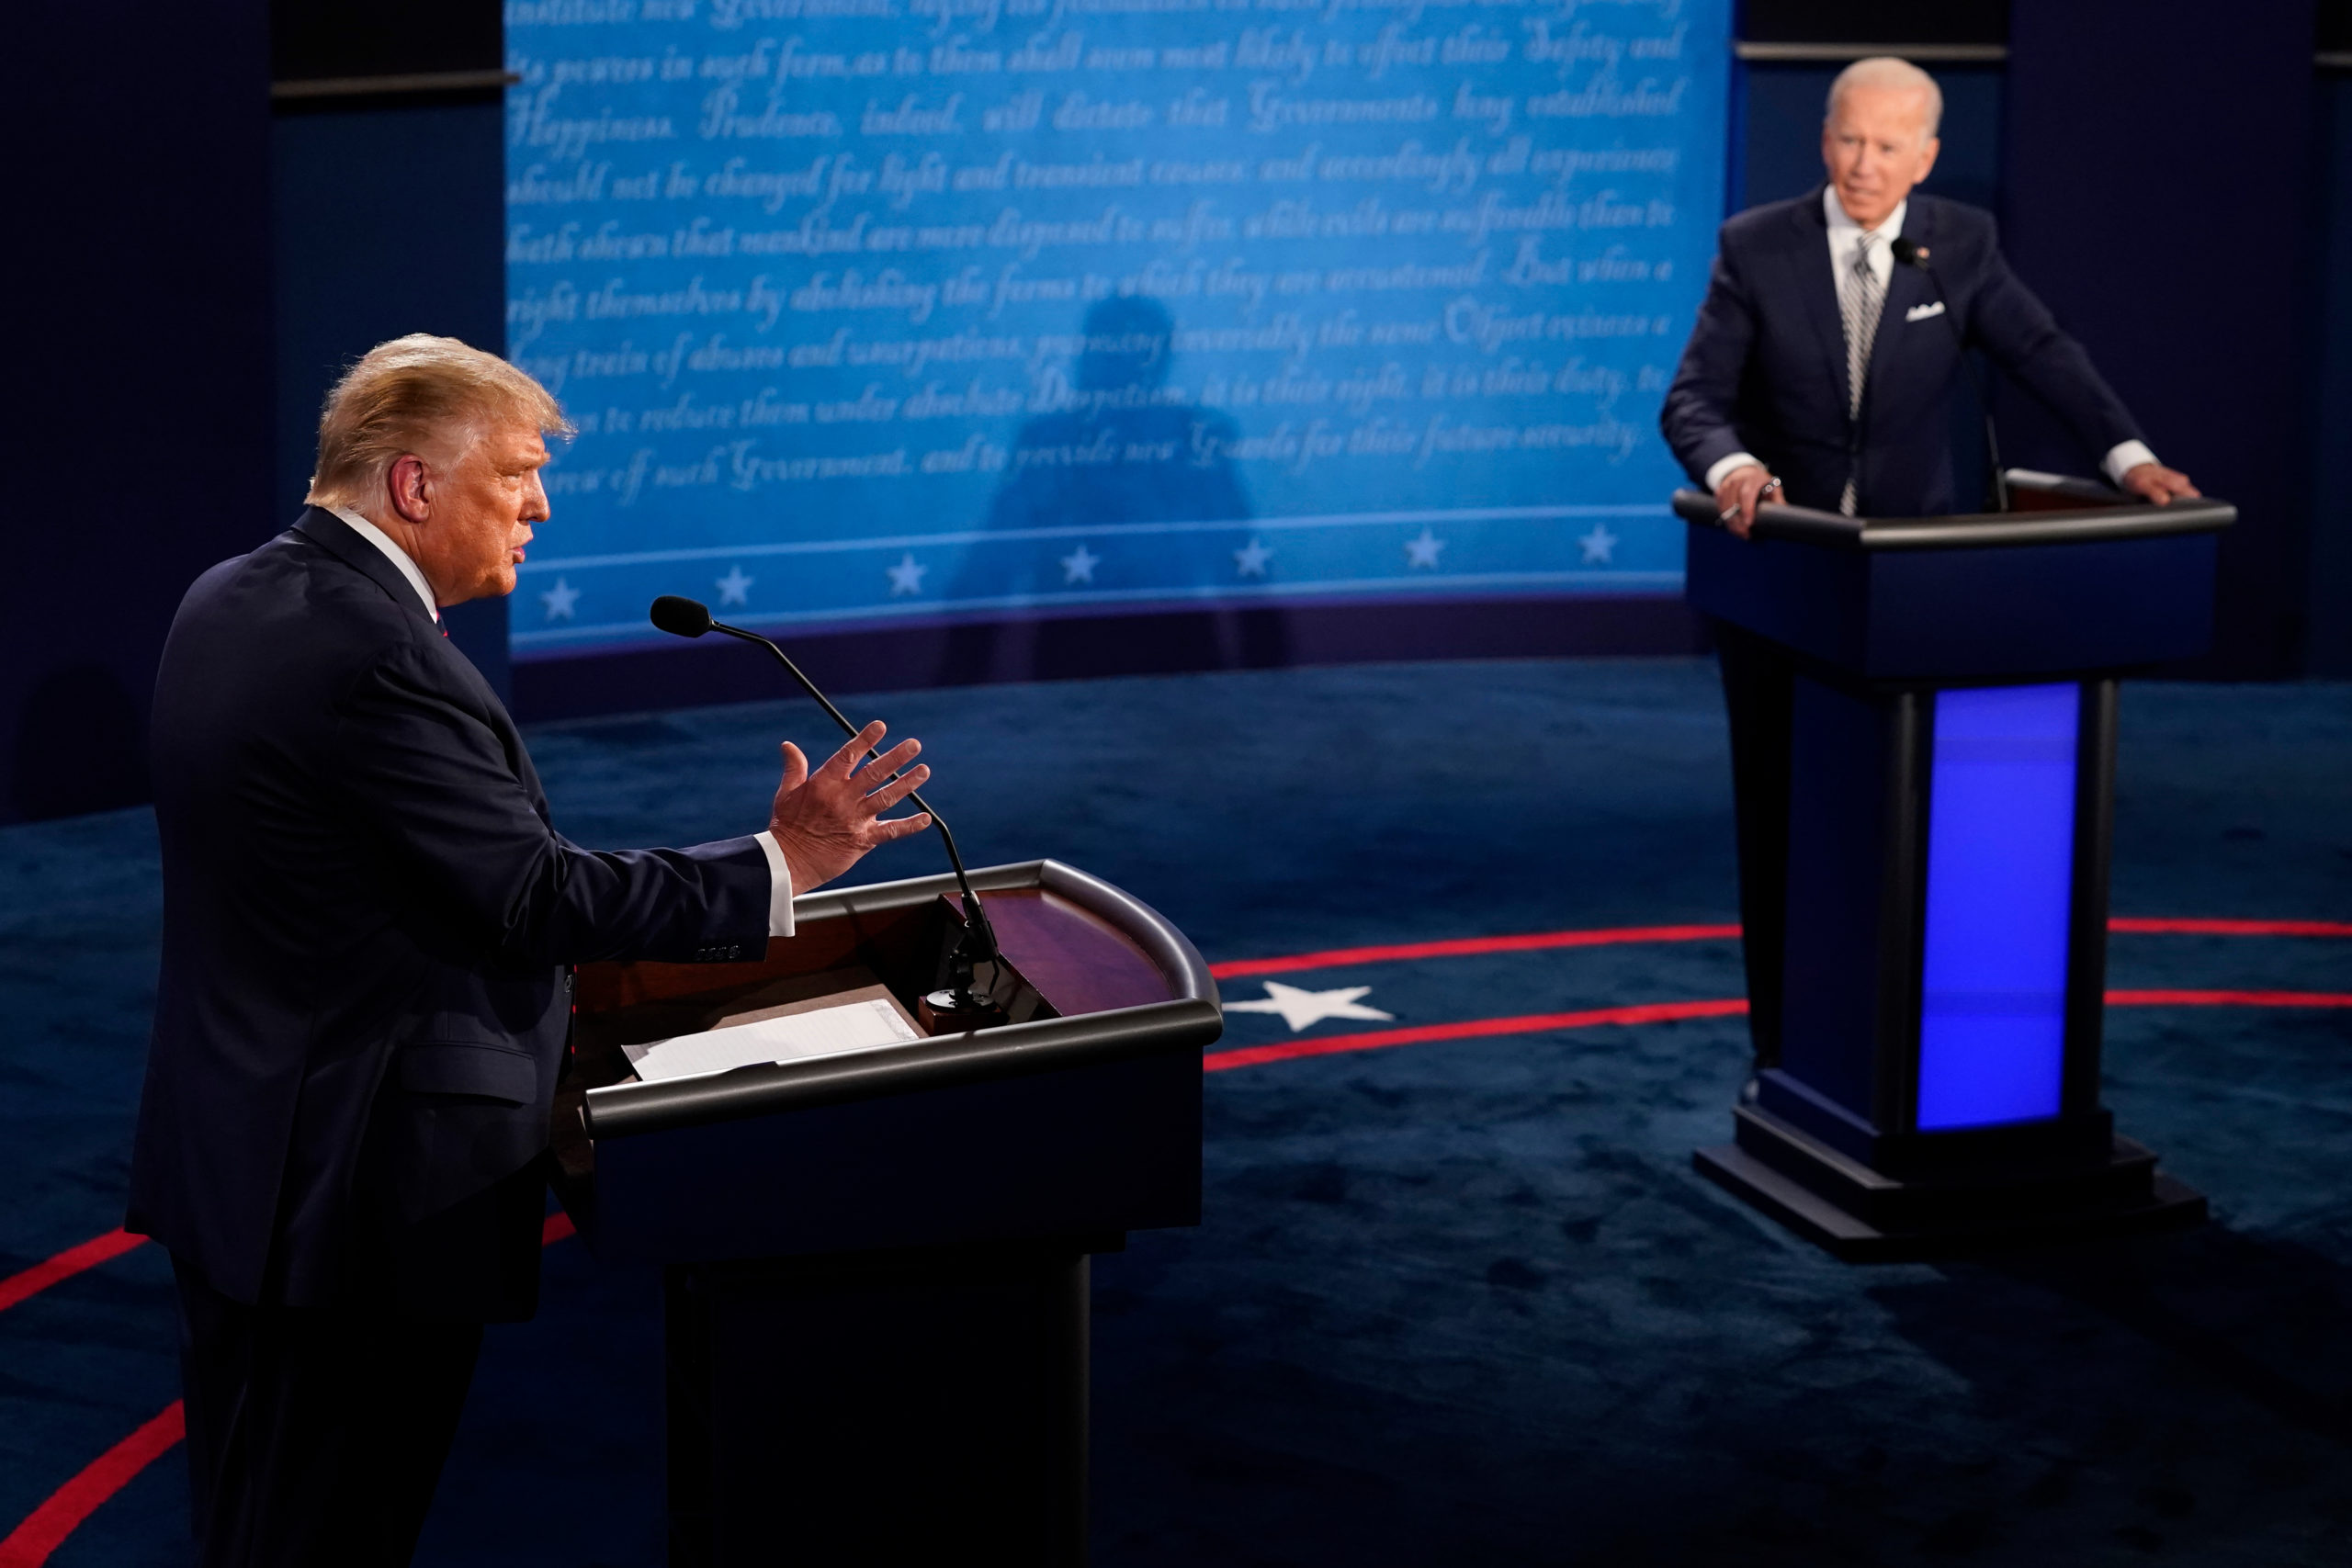 CLEVELAND, OHIO - SEPTEMBER 29: U.S. President Donald Trump speaks during the first presidential debate against former Vice President and Democratic presidential nominee Joe Biden at the Health Education Campus of Case Western Reserve University on September 29, 2020 in Cleveland, Ohio. This is the first of three planned debates between the two candidates in the lead up to the election on November 3. (Photo by Morry Gash-Pool/Getty Images)